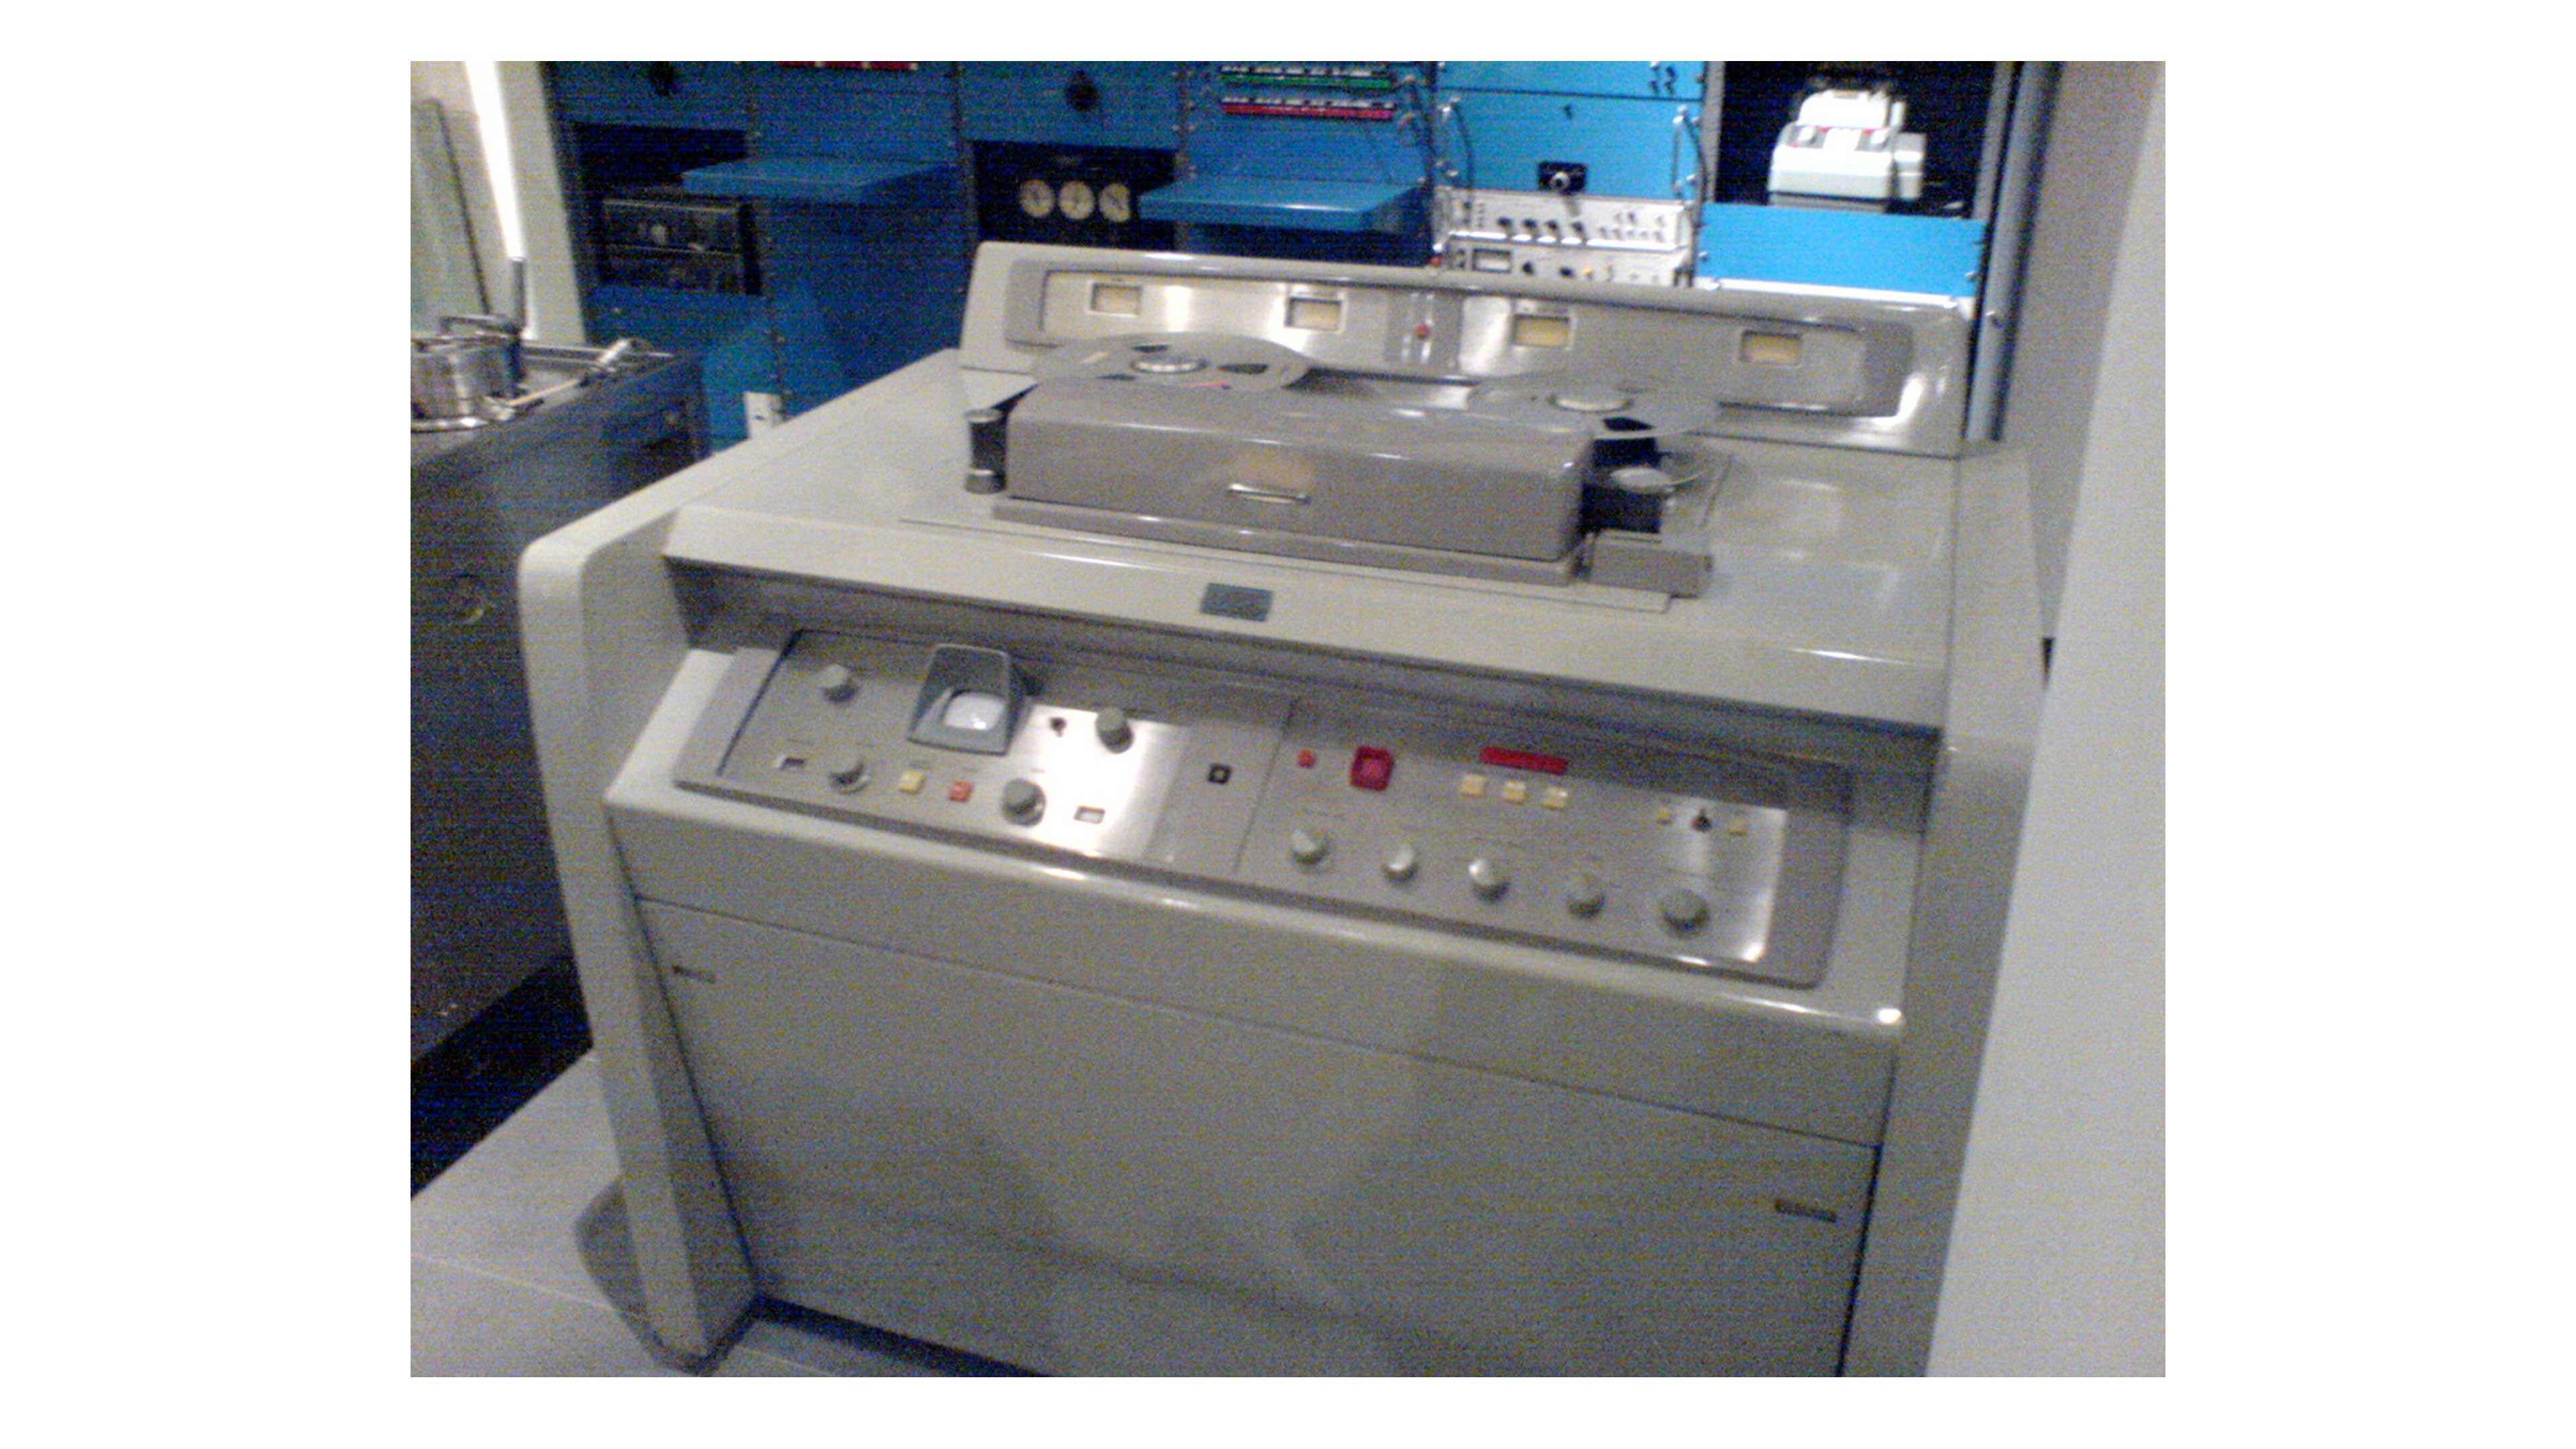 First magnetic tape video recorder by Ampex.